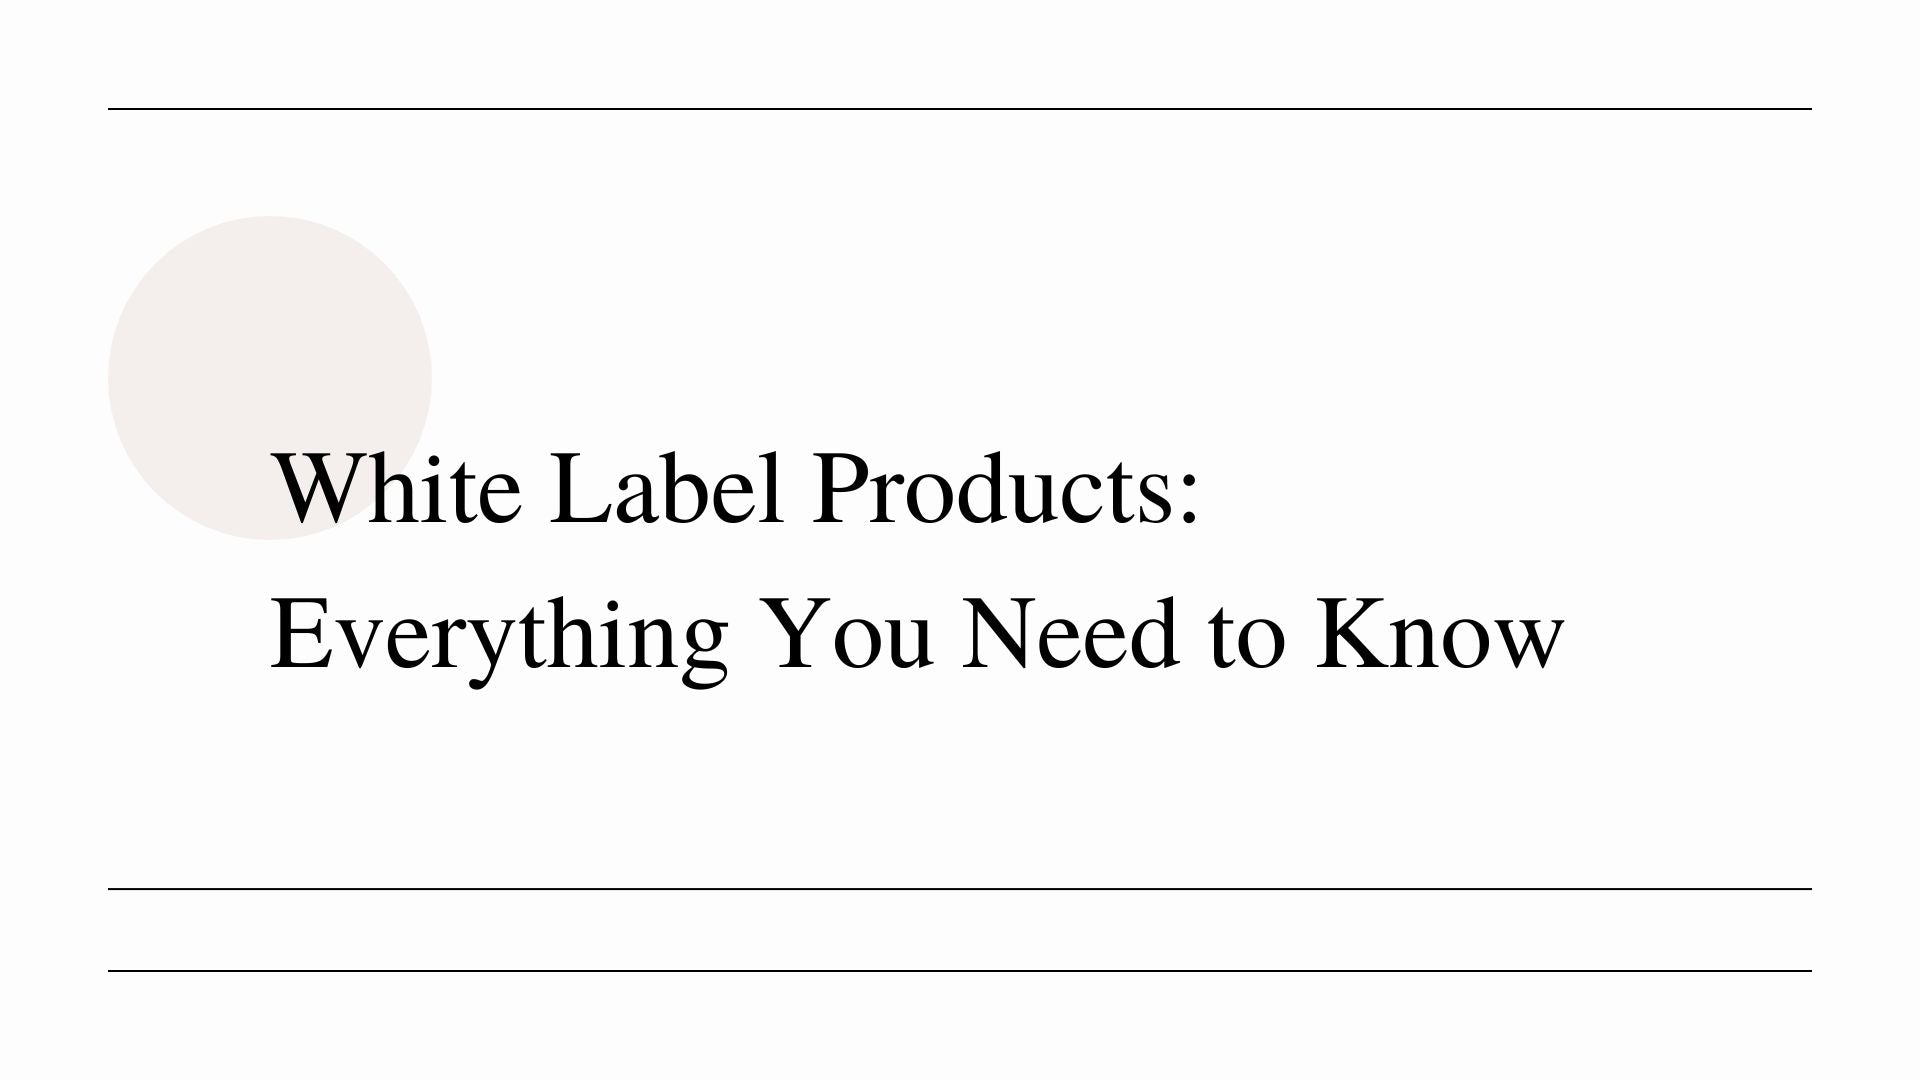 White Label Products: Everything You Need to Know